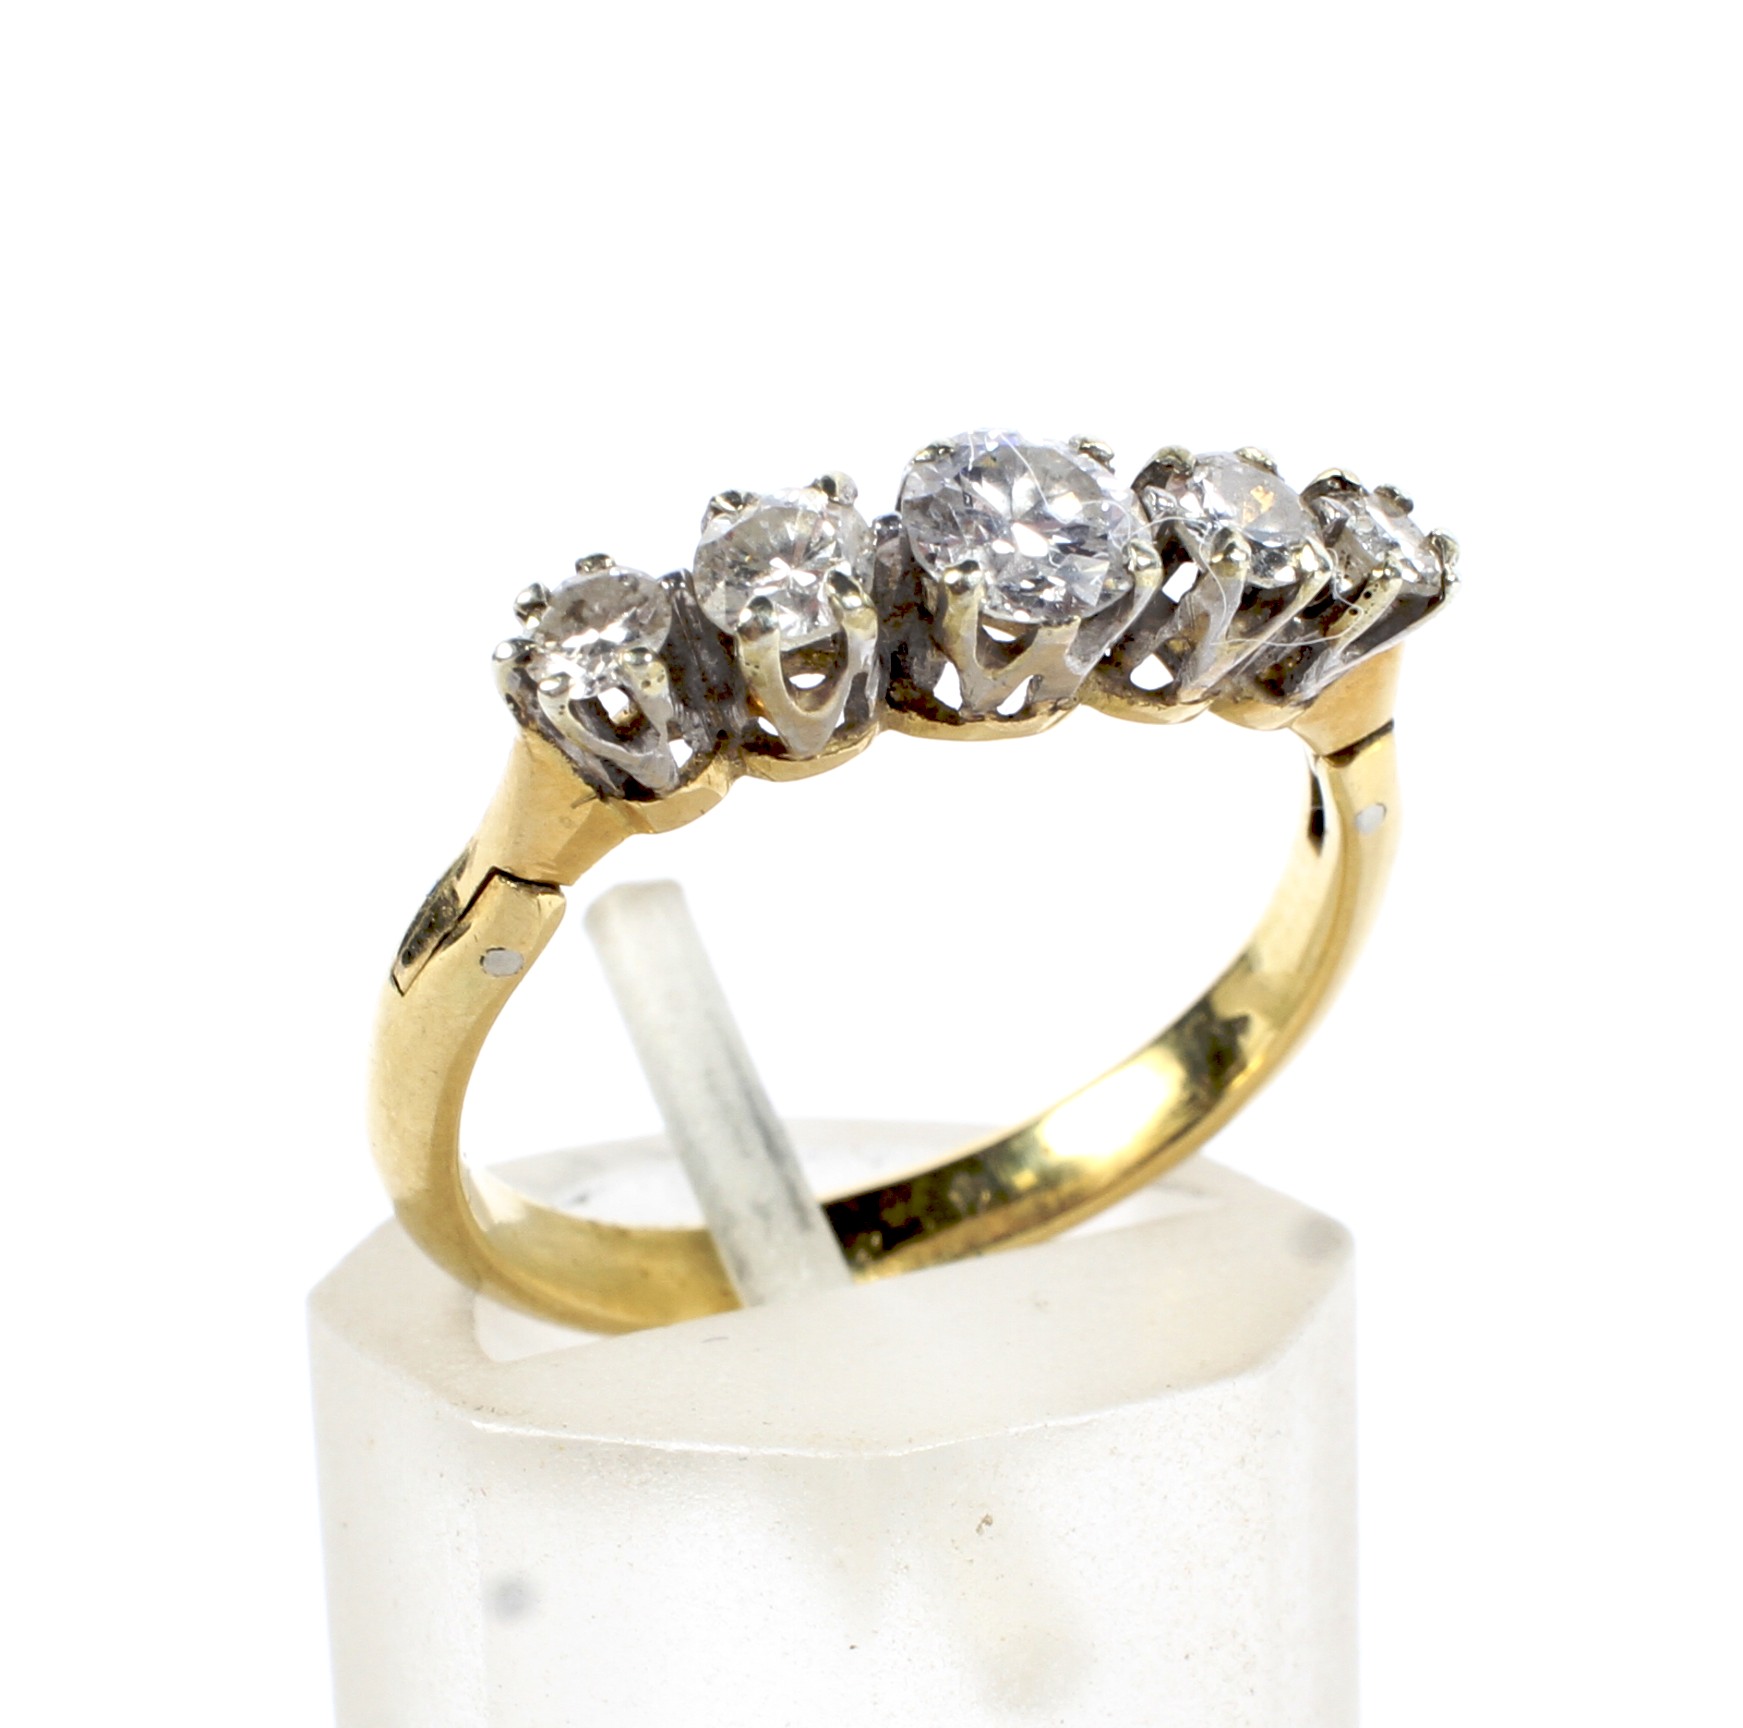 A vintage gold and diamond five stone ring. The graduated early modern-round-brilliants approx. 0.